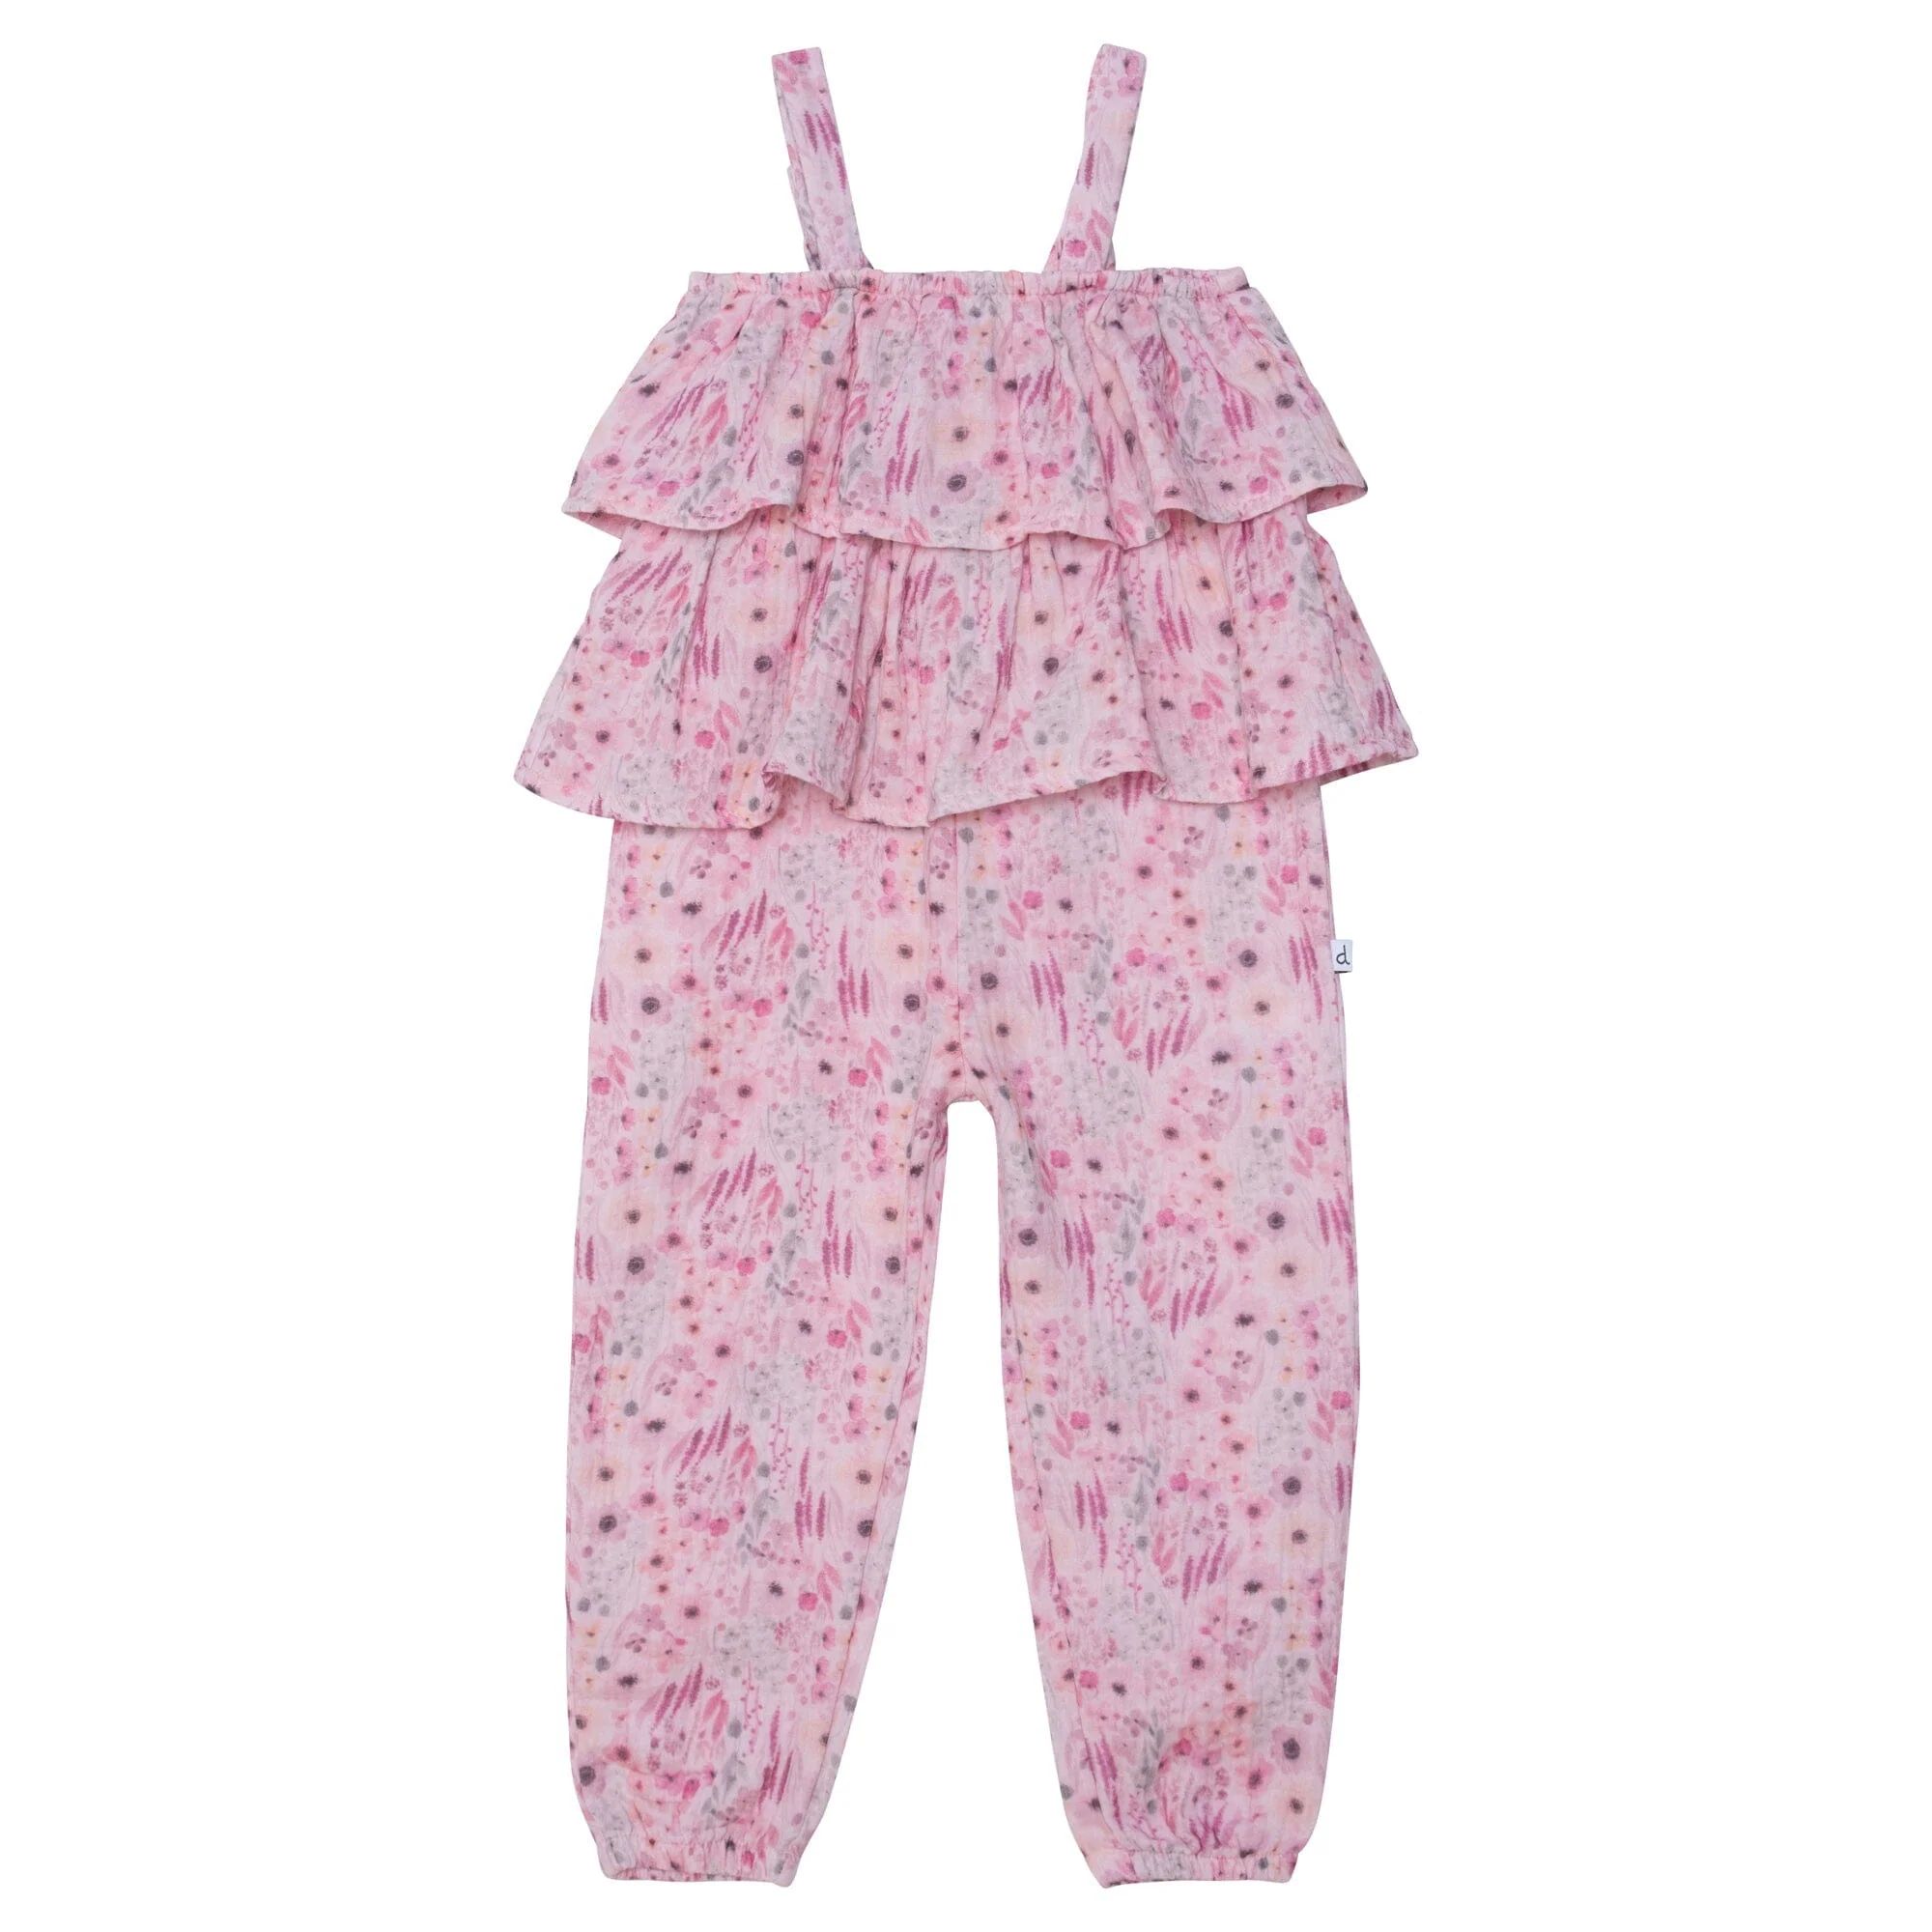 Printed Sleeveless Jumpsuit With Frill Pink Watercolor Flowers | Deux par Deux Childrens Designer Clothing